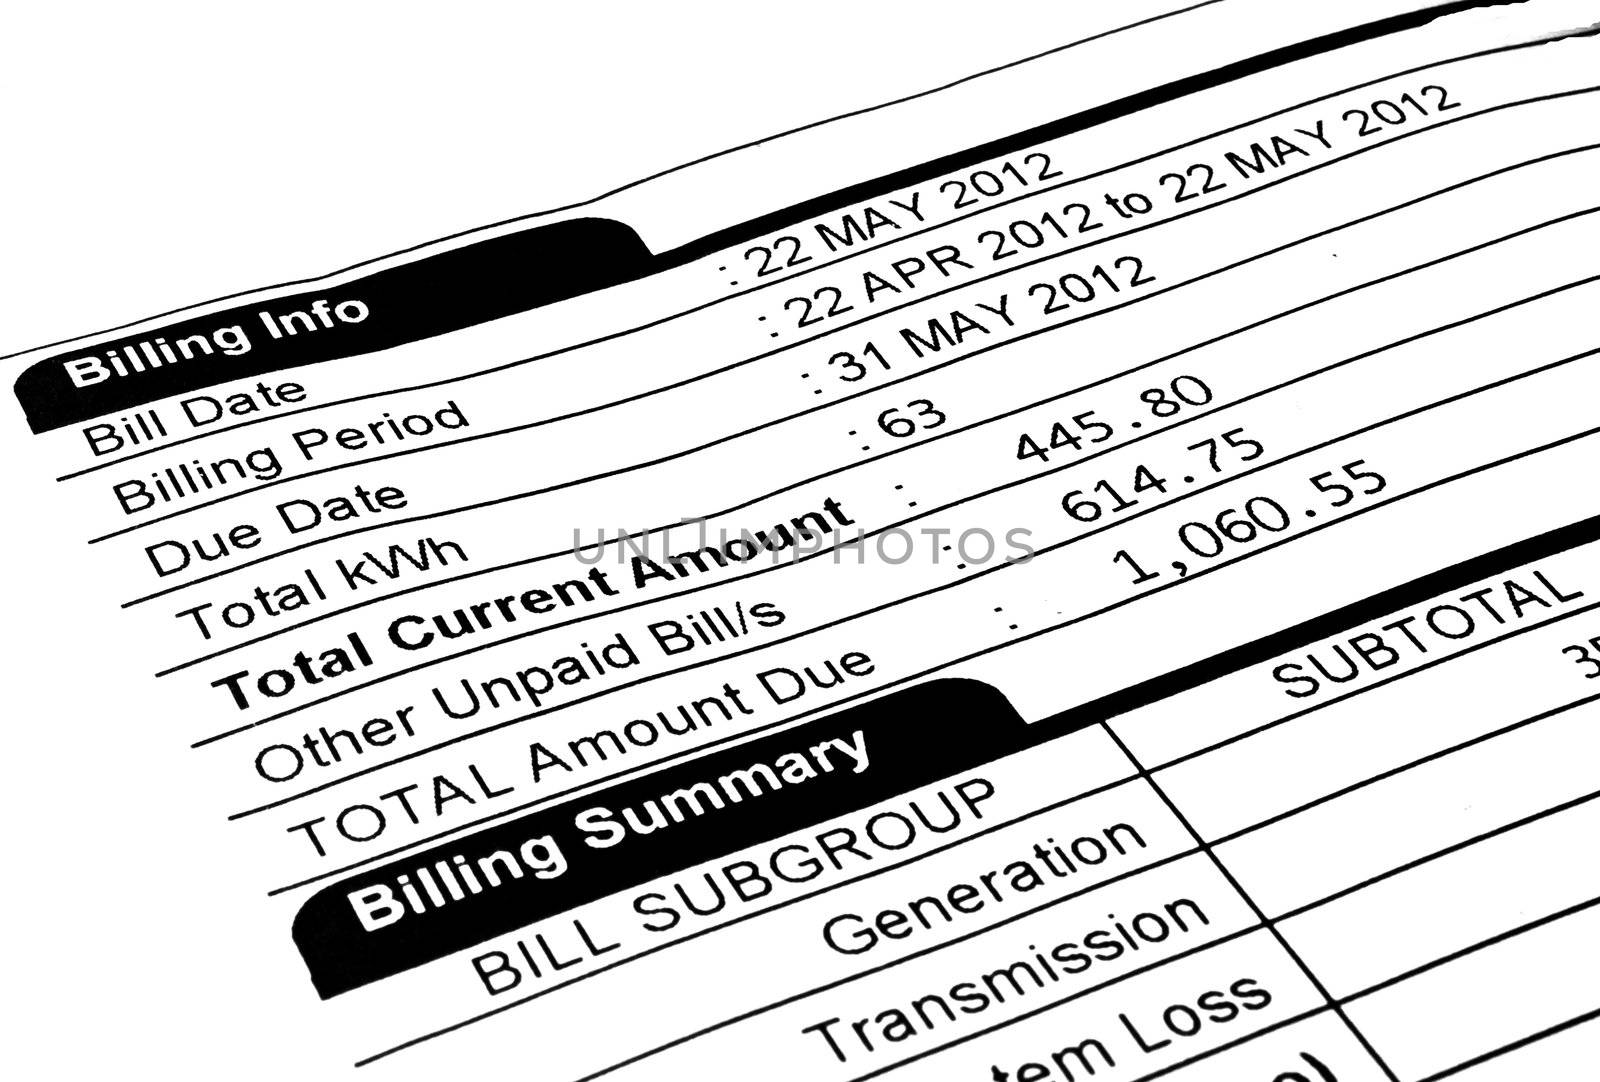 Electric bill for payment by the consumer on a specific date